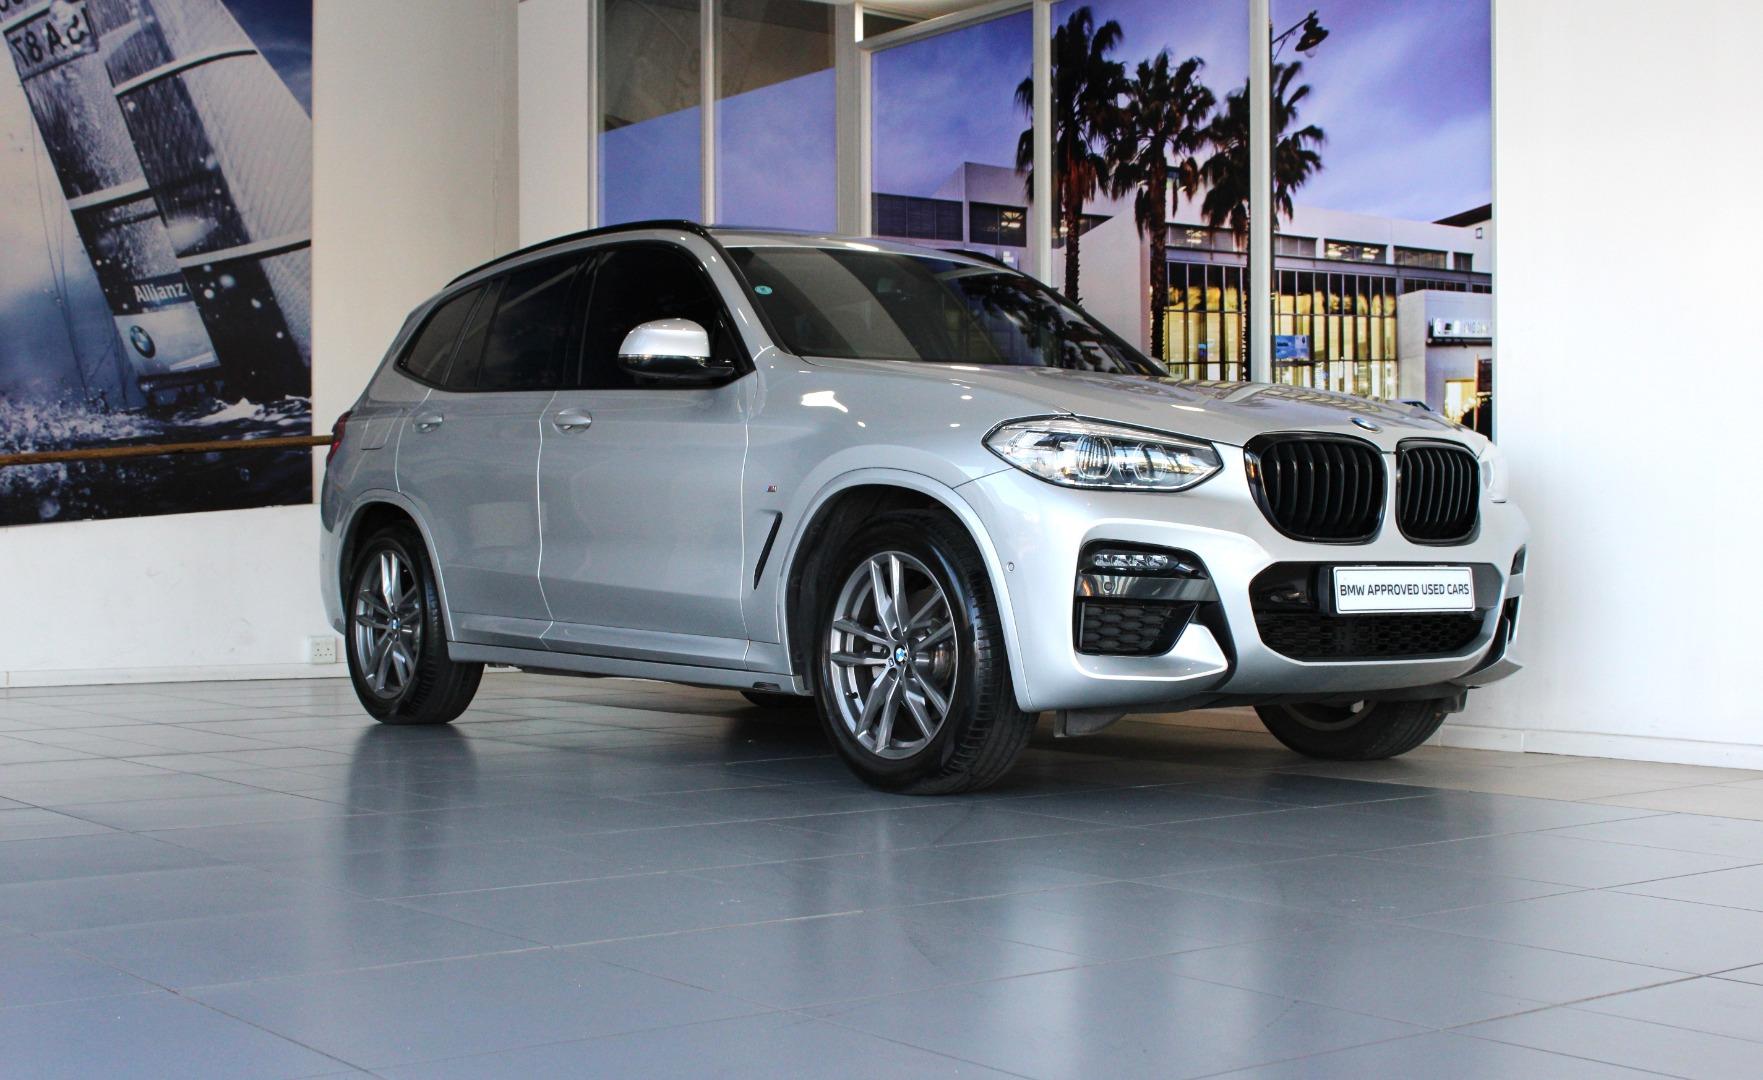 2021 BMW X3 xDRIVE 20d M-SPORT (G01)  for sale - SMG12|USED|115373